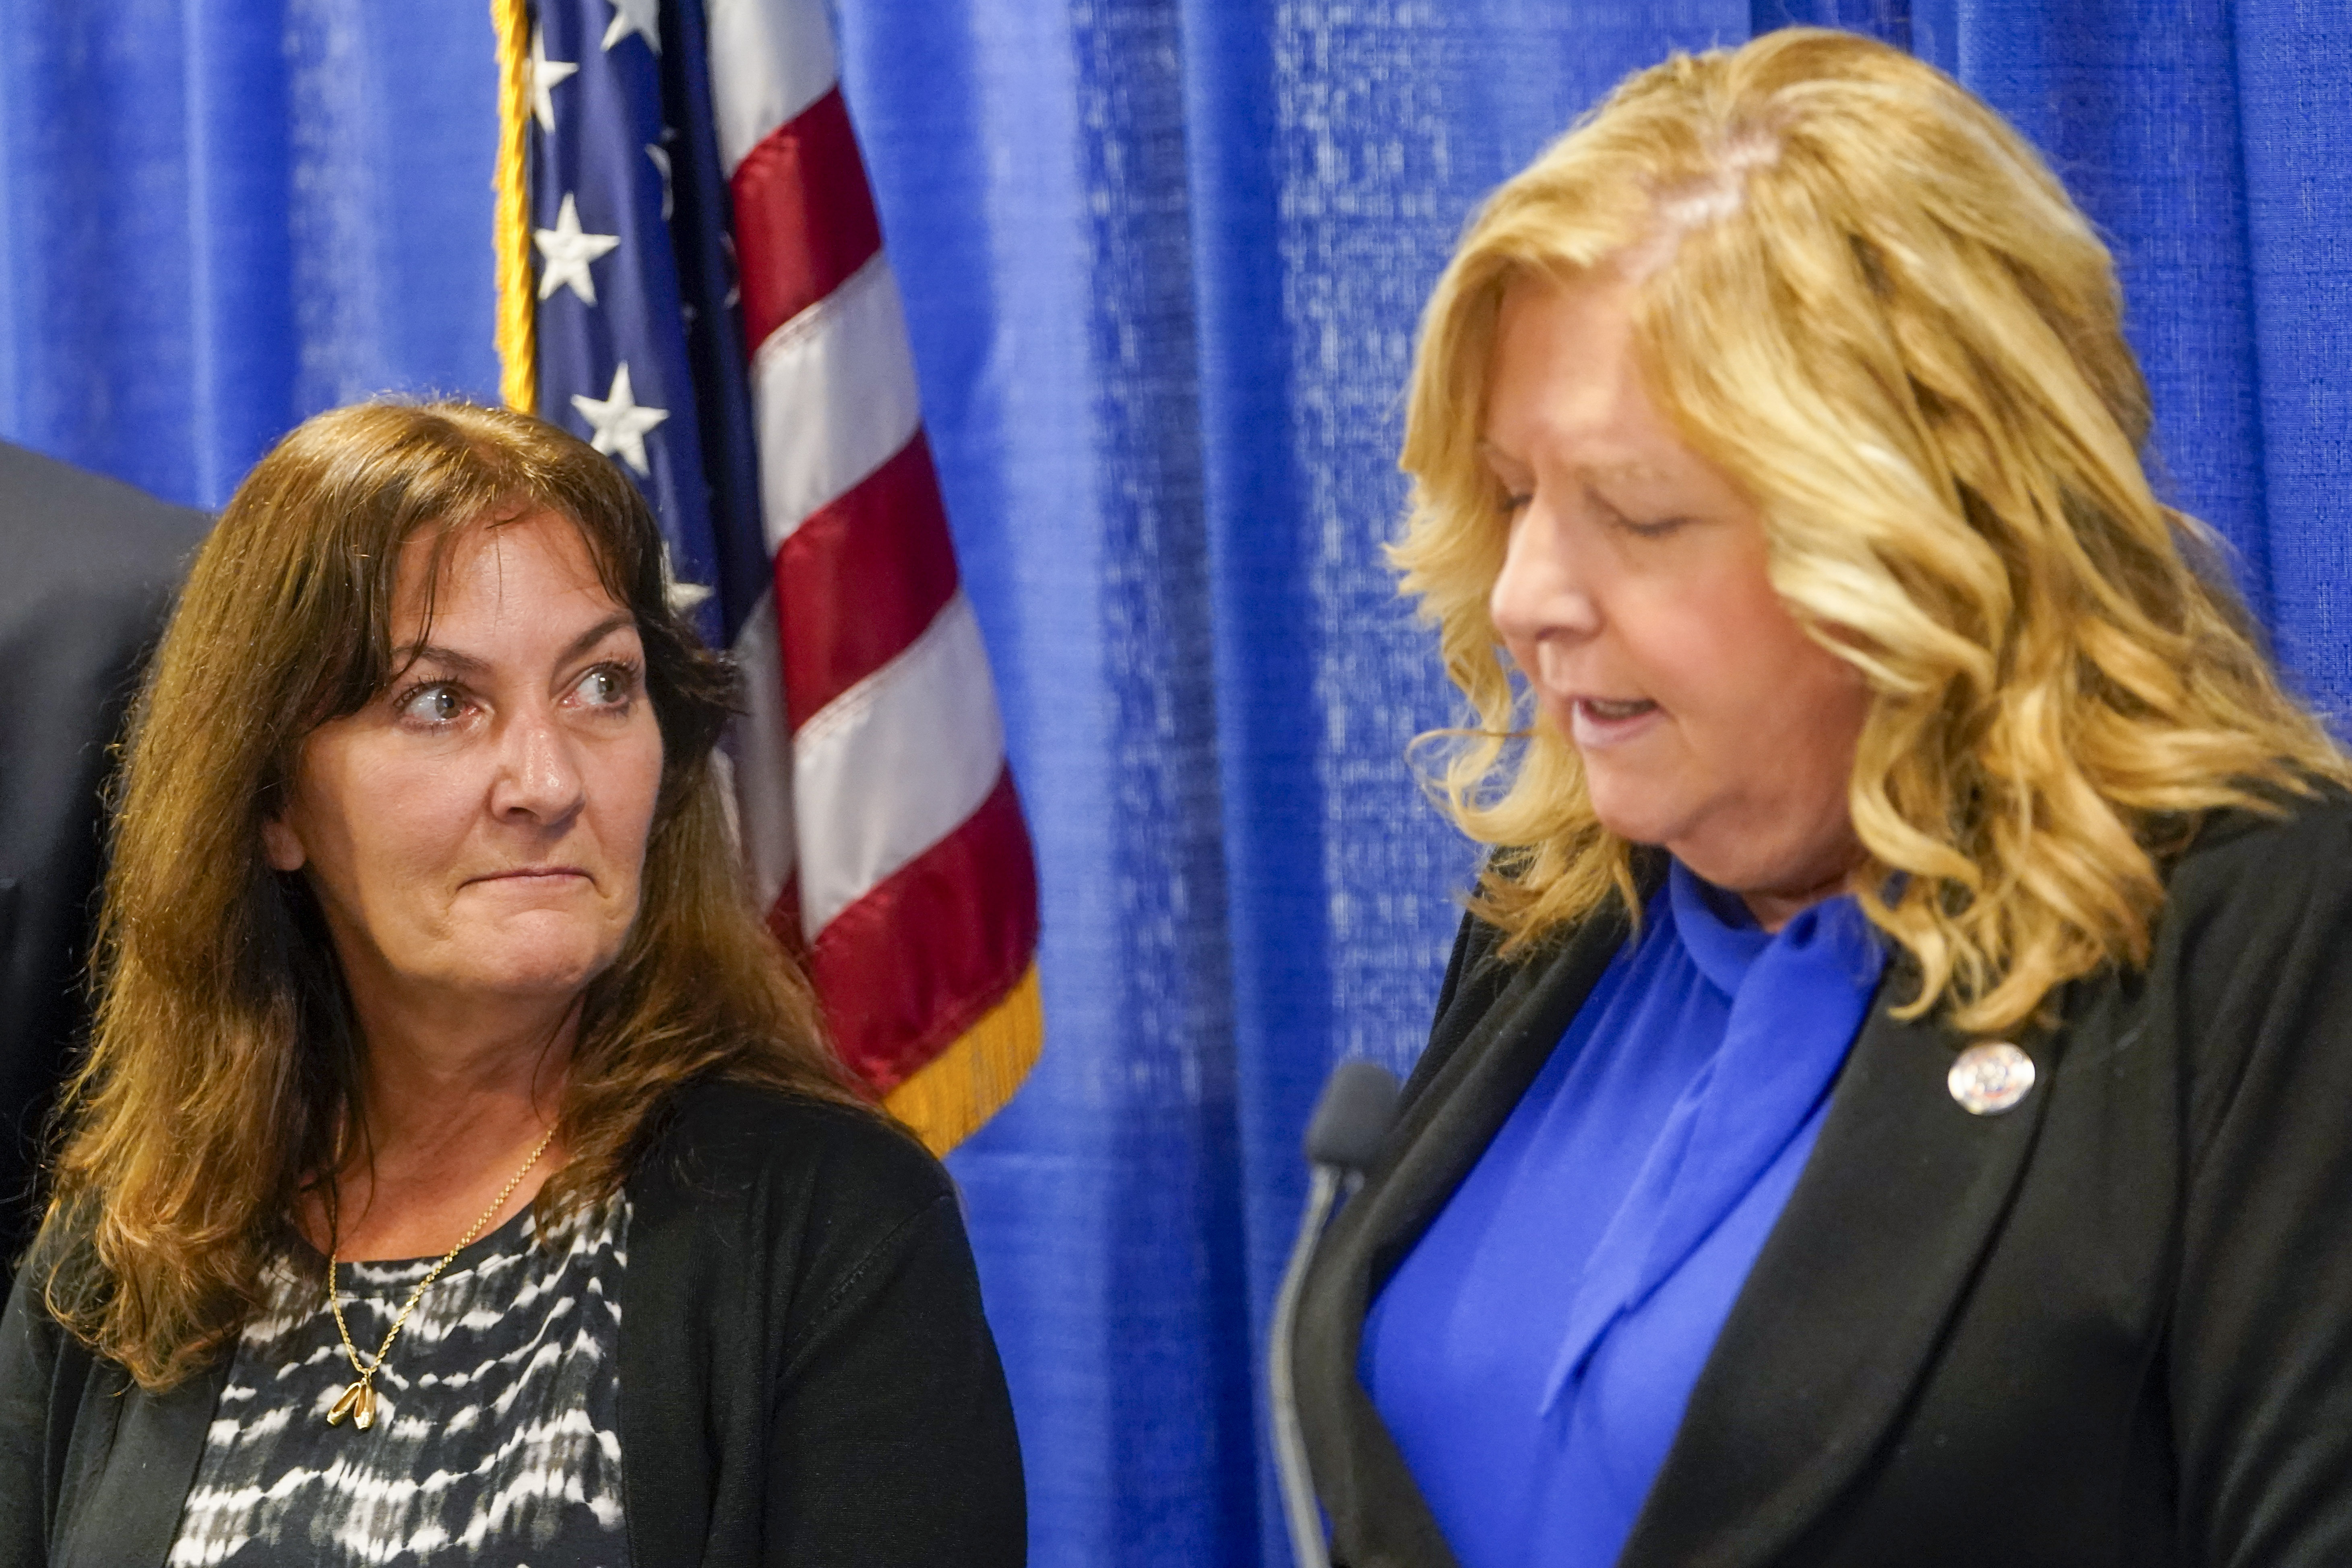 Darlene Altman, left, daughter of Diane Cusick, looks on as Nassau County District Attorney Anne Donnelly speaks during a news conference, Wednesday, June 22, 2022, in Mineola, N.Y. More than 50 years after a woman was found dead in her car at a mall on Long Island, authorities prosecutors are expected to announce that DNA evidence has linked the slaying to Richard Cottingham, a serial killer who has been connected to 11 murders in New York and New Jersey between 1965 and 1980. (AP Photo/Mary Al